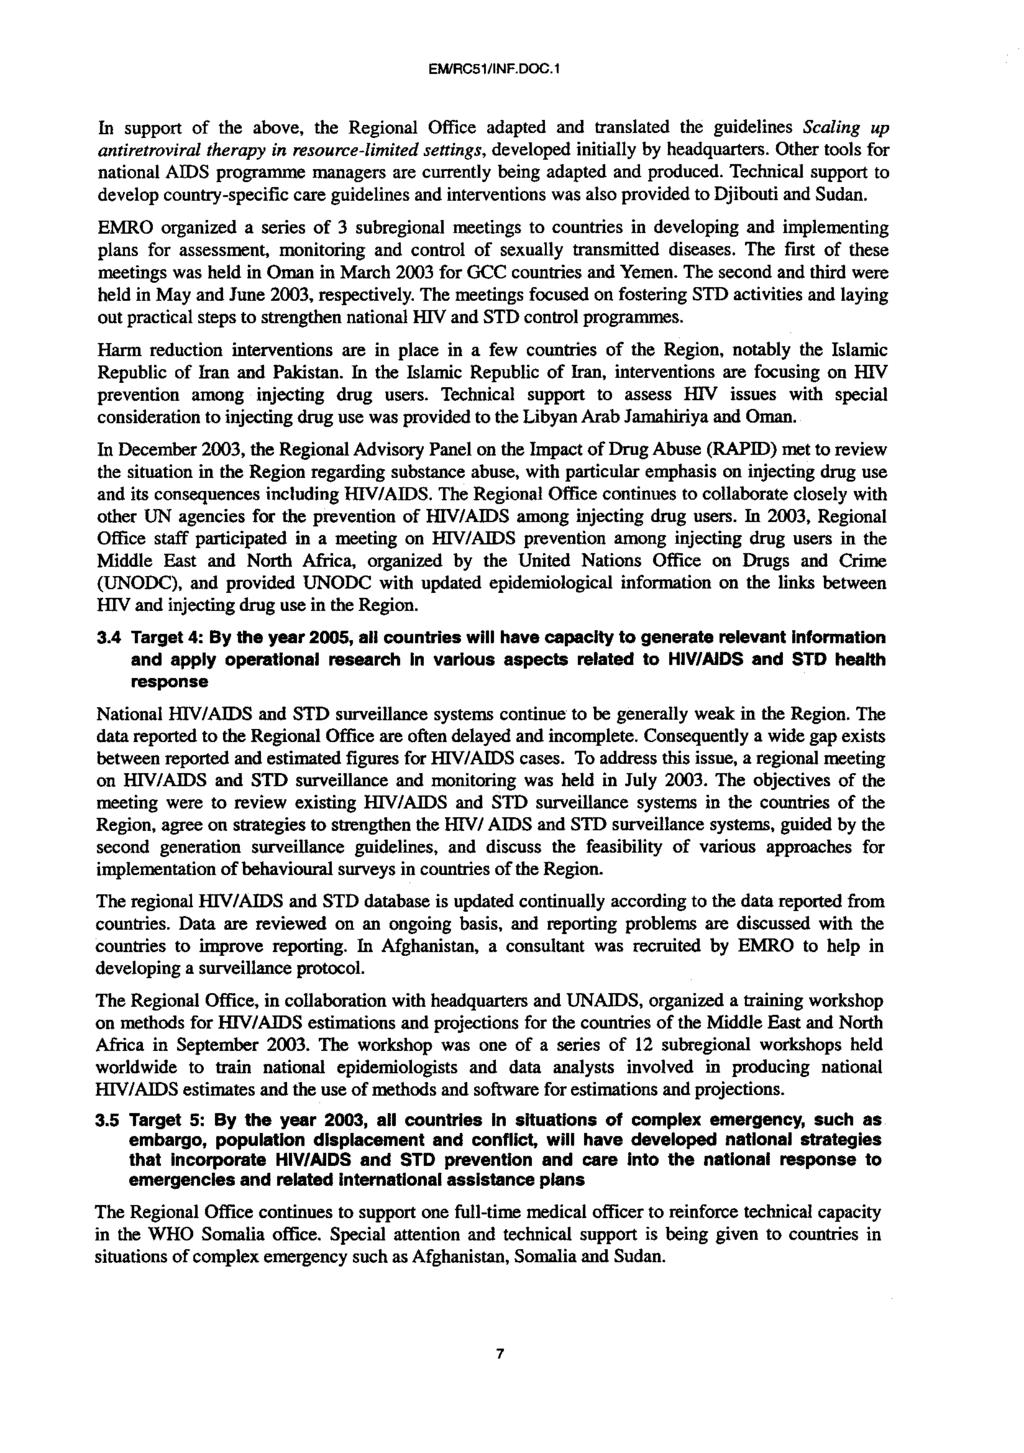 EMlRC/INF.DOC. In support of the above, the Regional Office adapted and translated the guidelines Scaling up antiretroviral therapy in resource-limited settings, developed initially by headquarters.